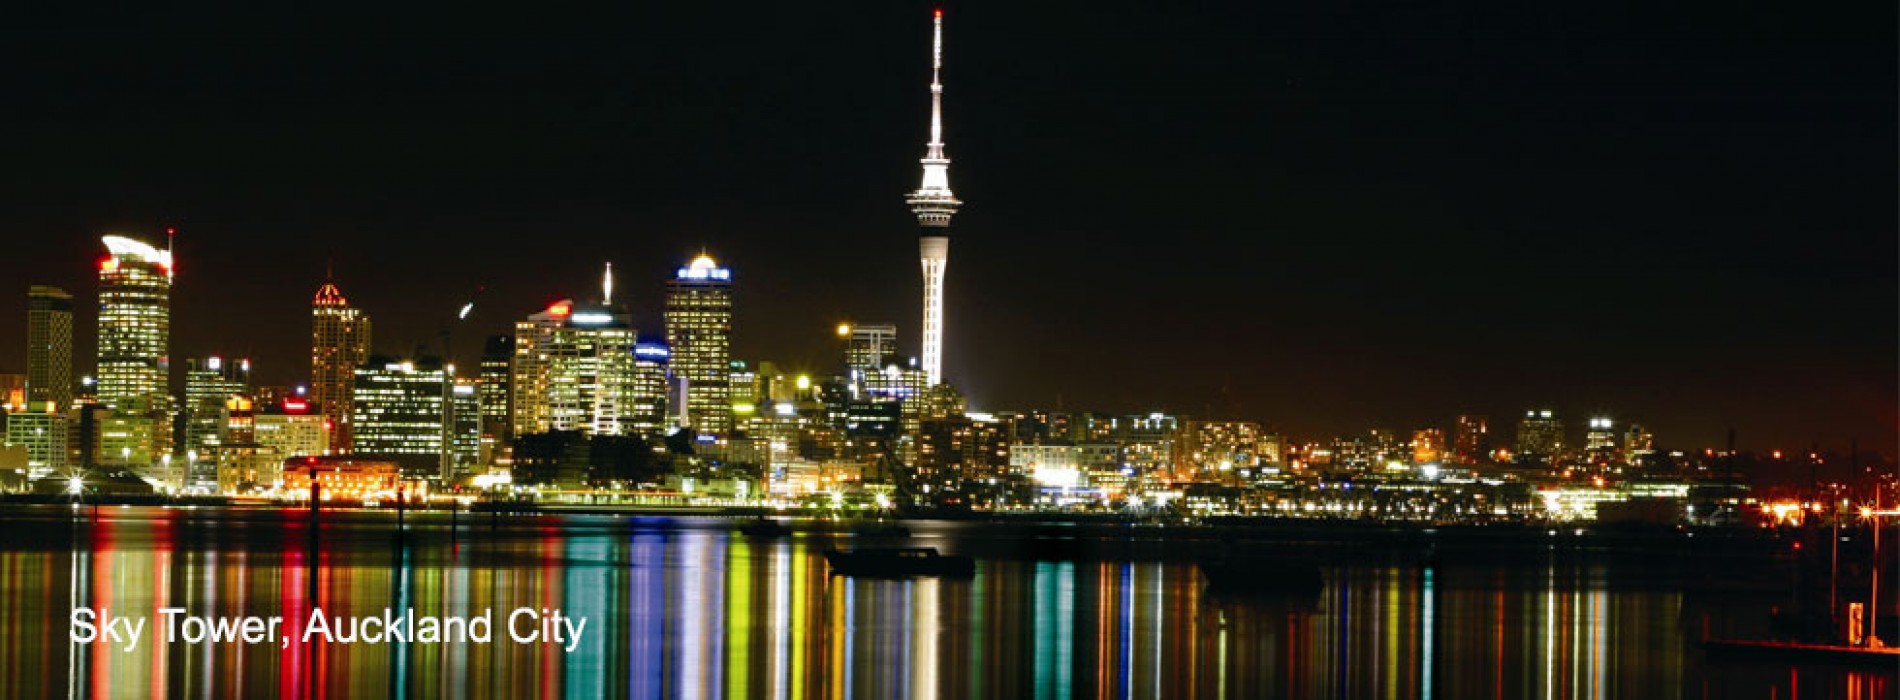 Most Shared Spots in New Zealand on Instagram in 2015